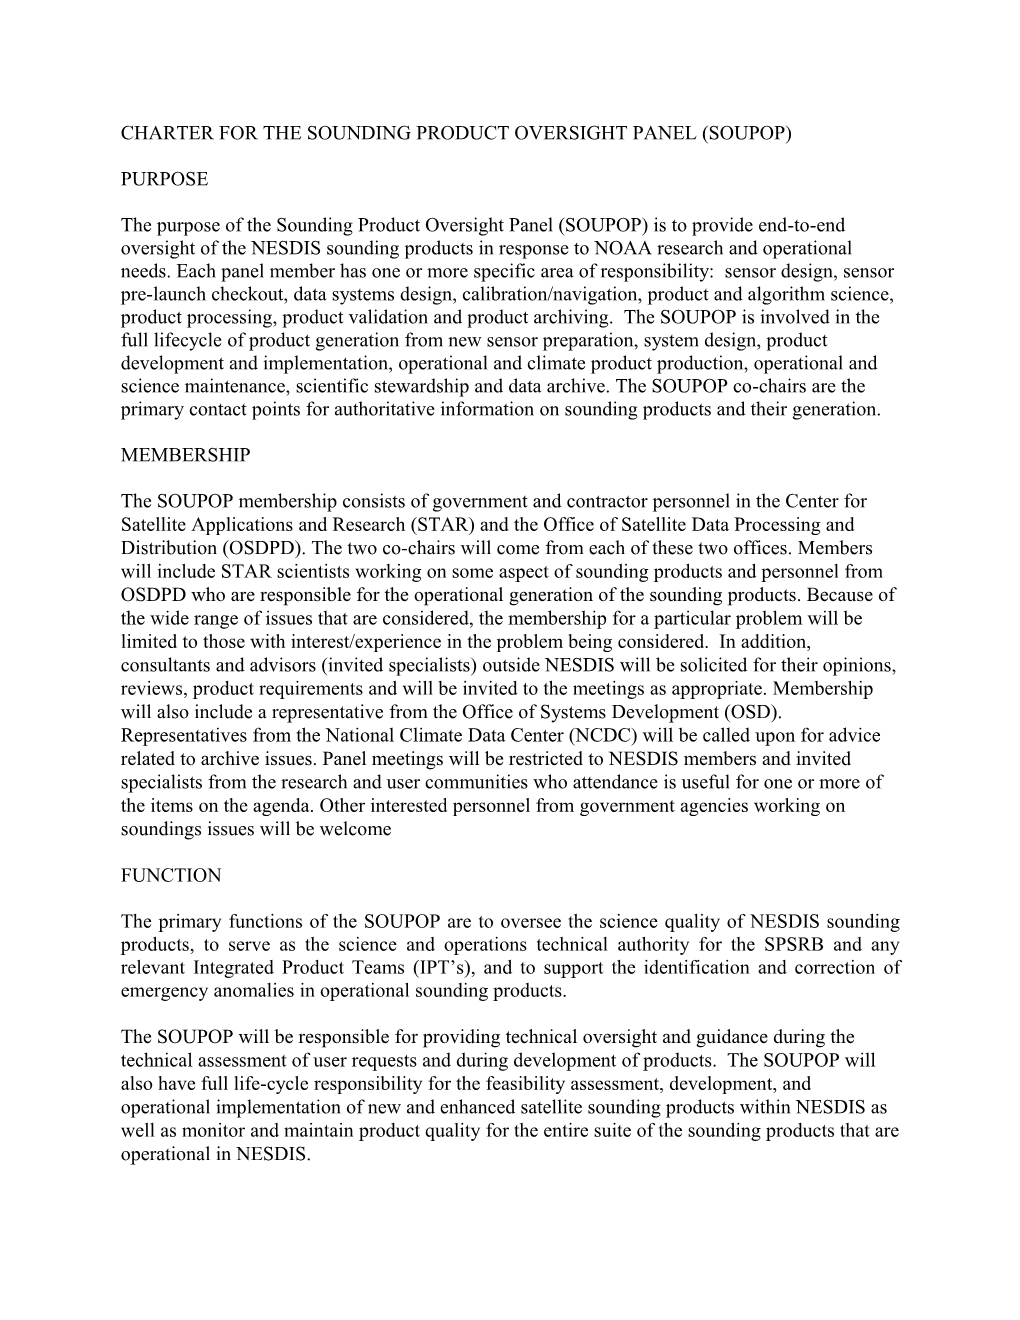 Charter for the Sounding Product Oversight Panel (Soupop)